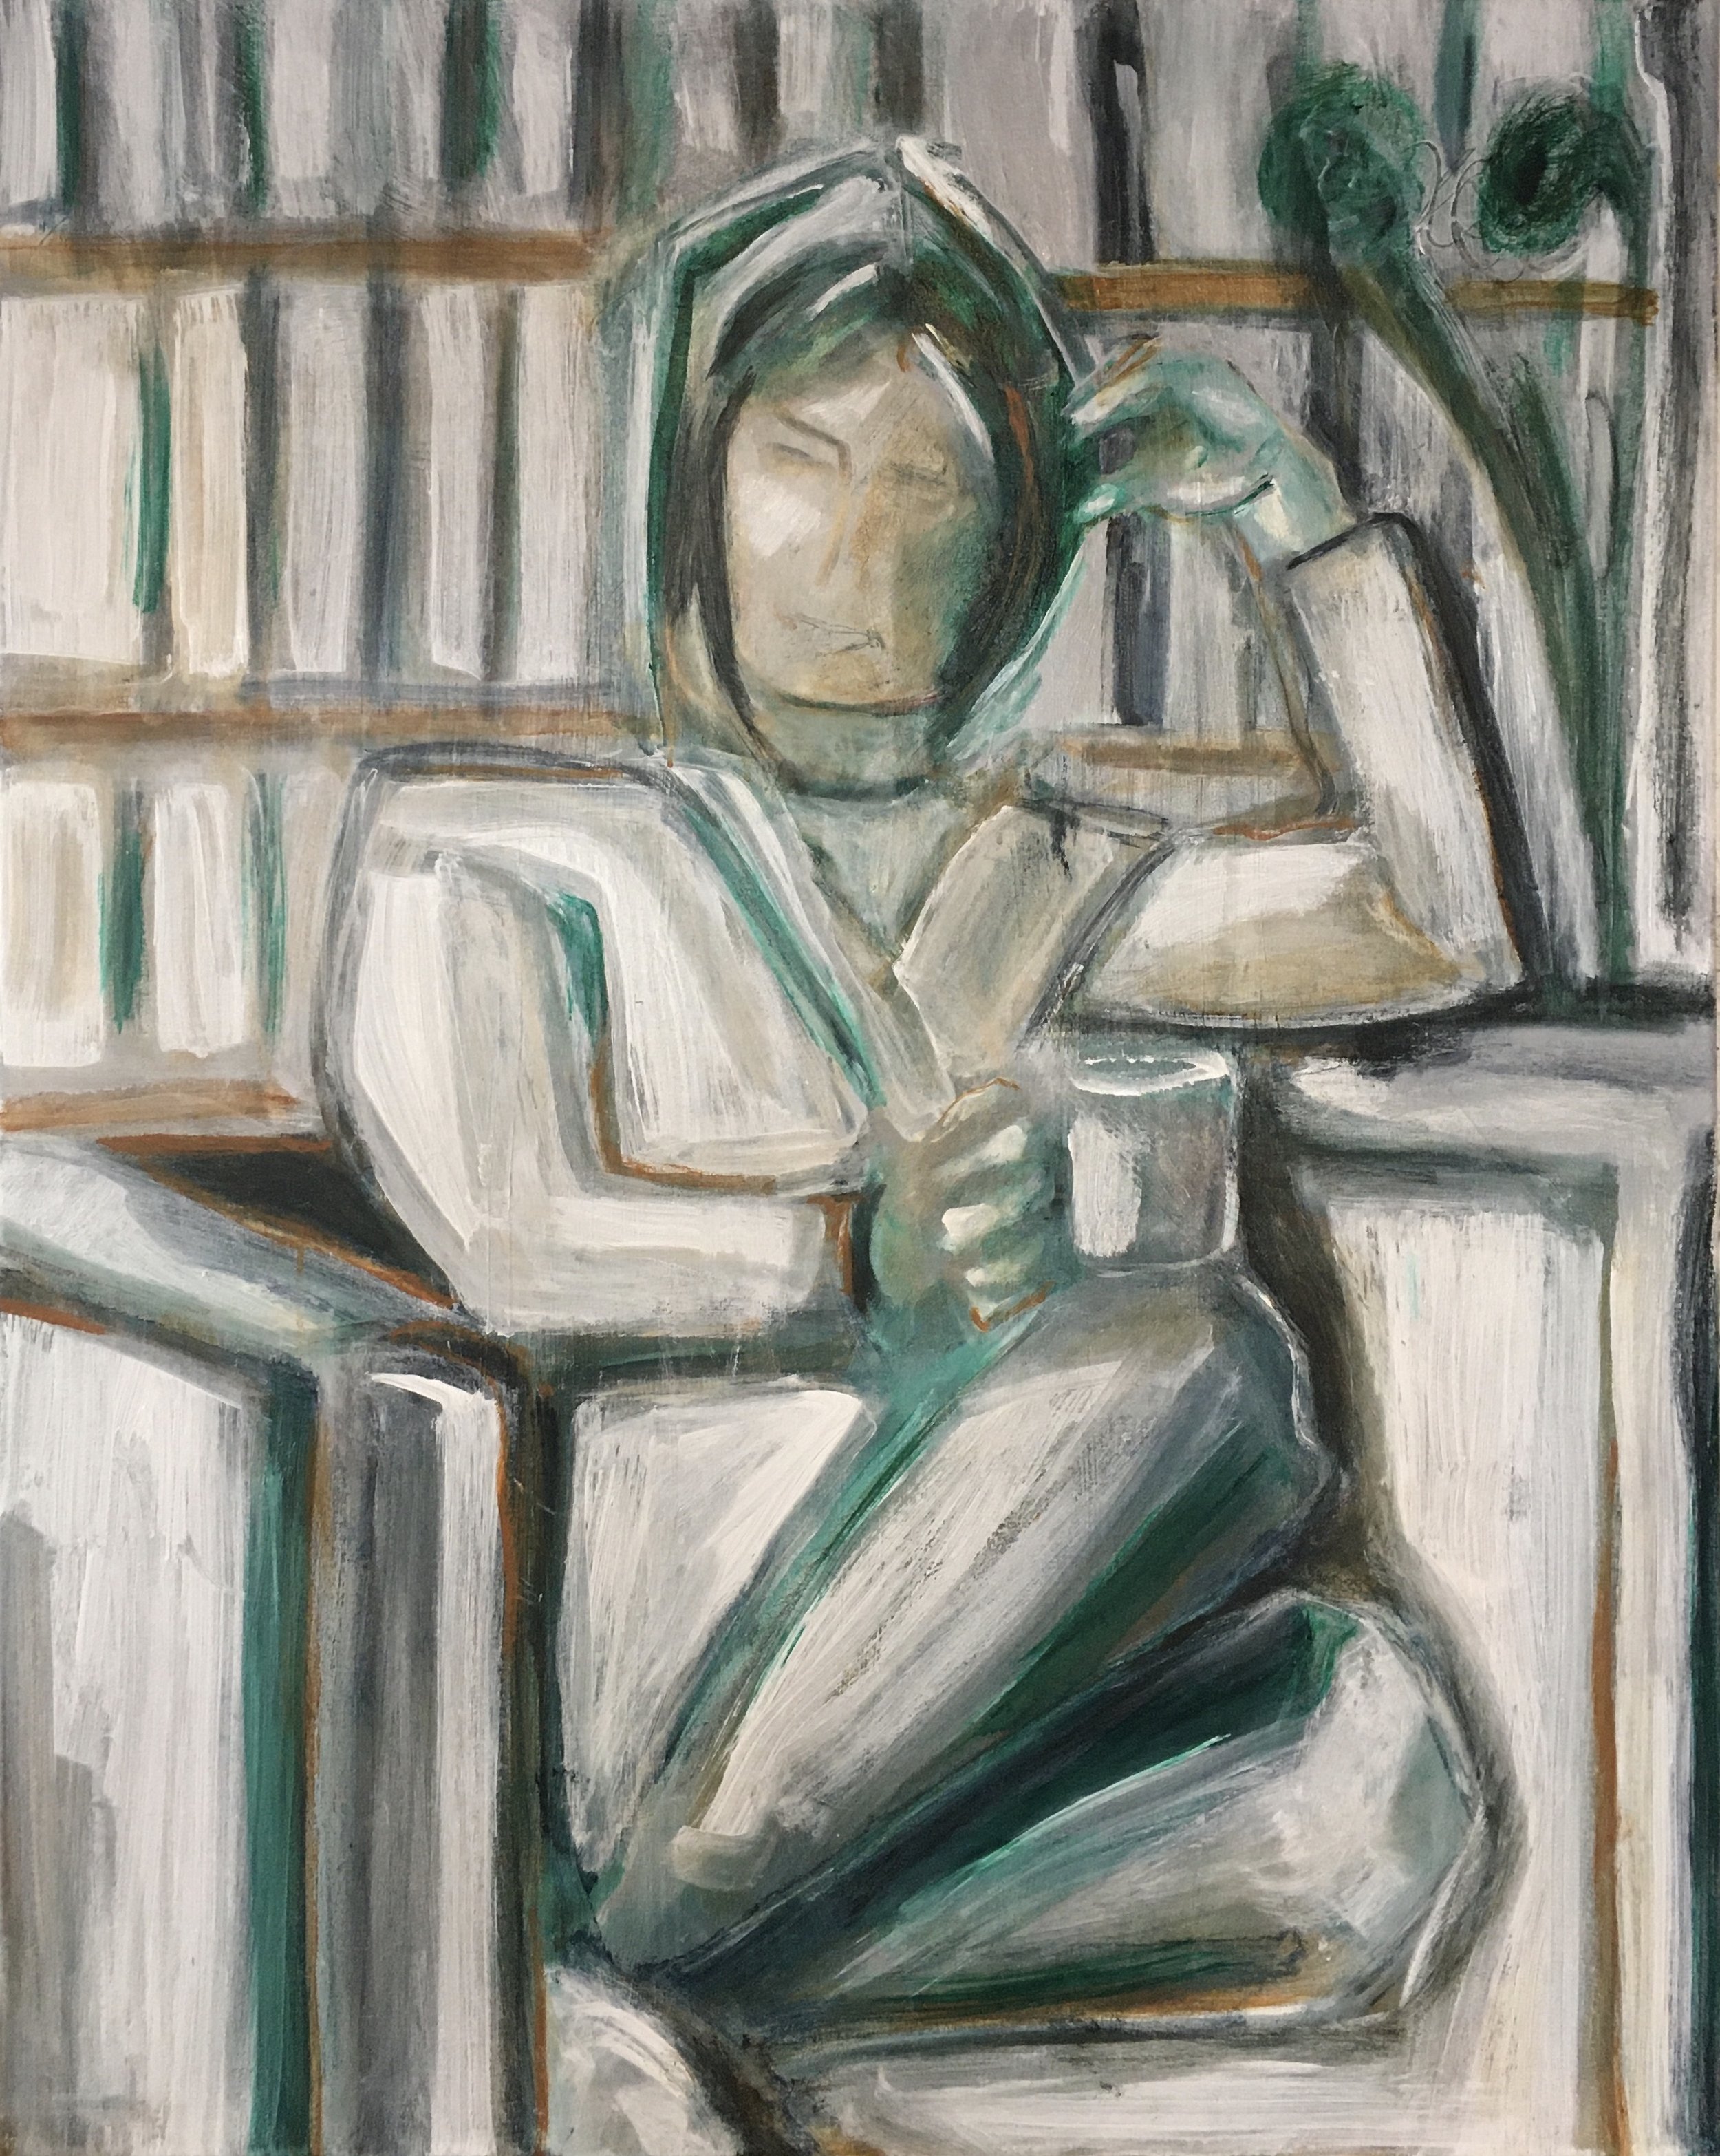 Seated Woman 6, 2019